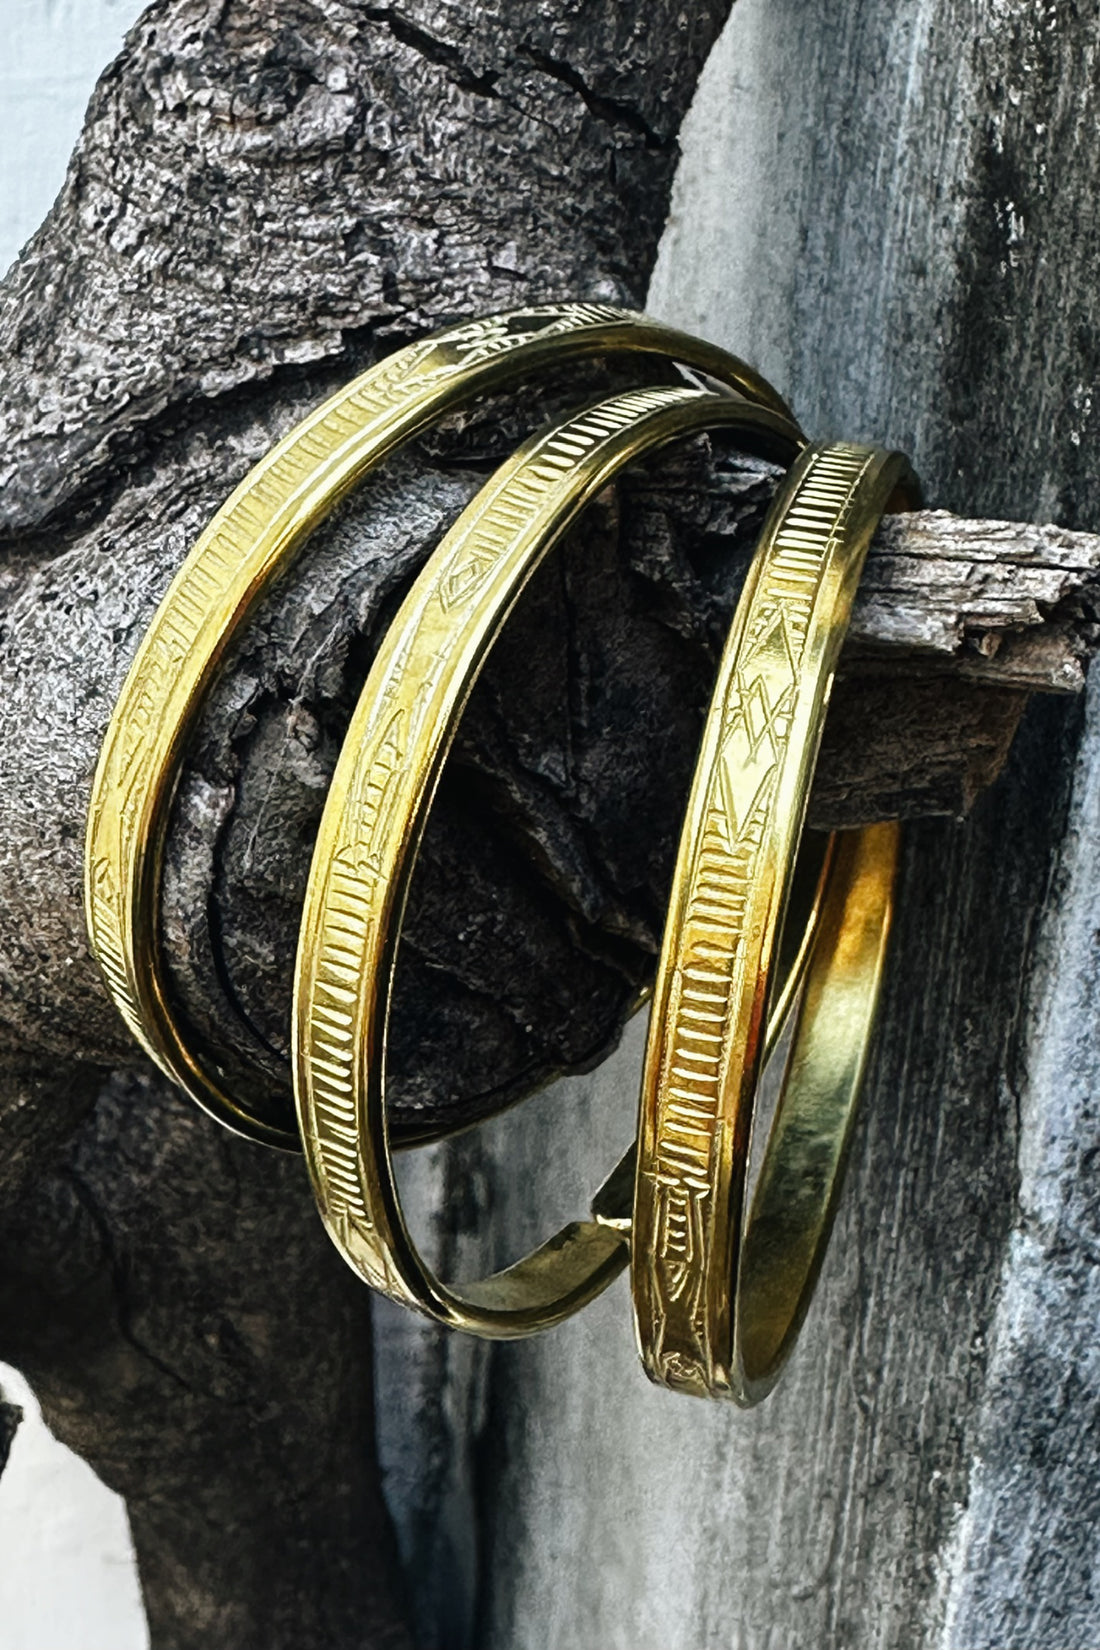 Engraved Giniling Bangles